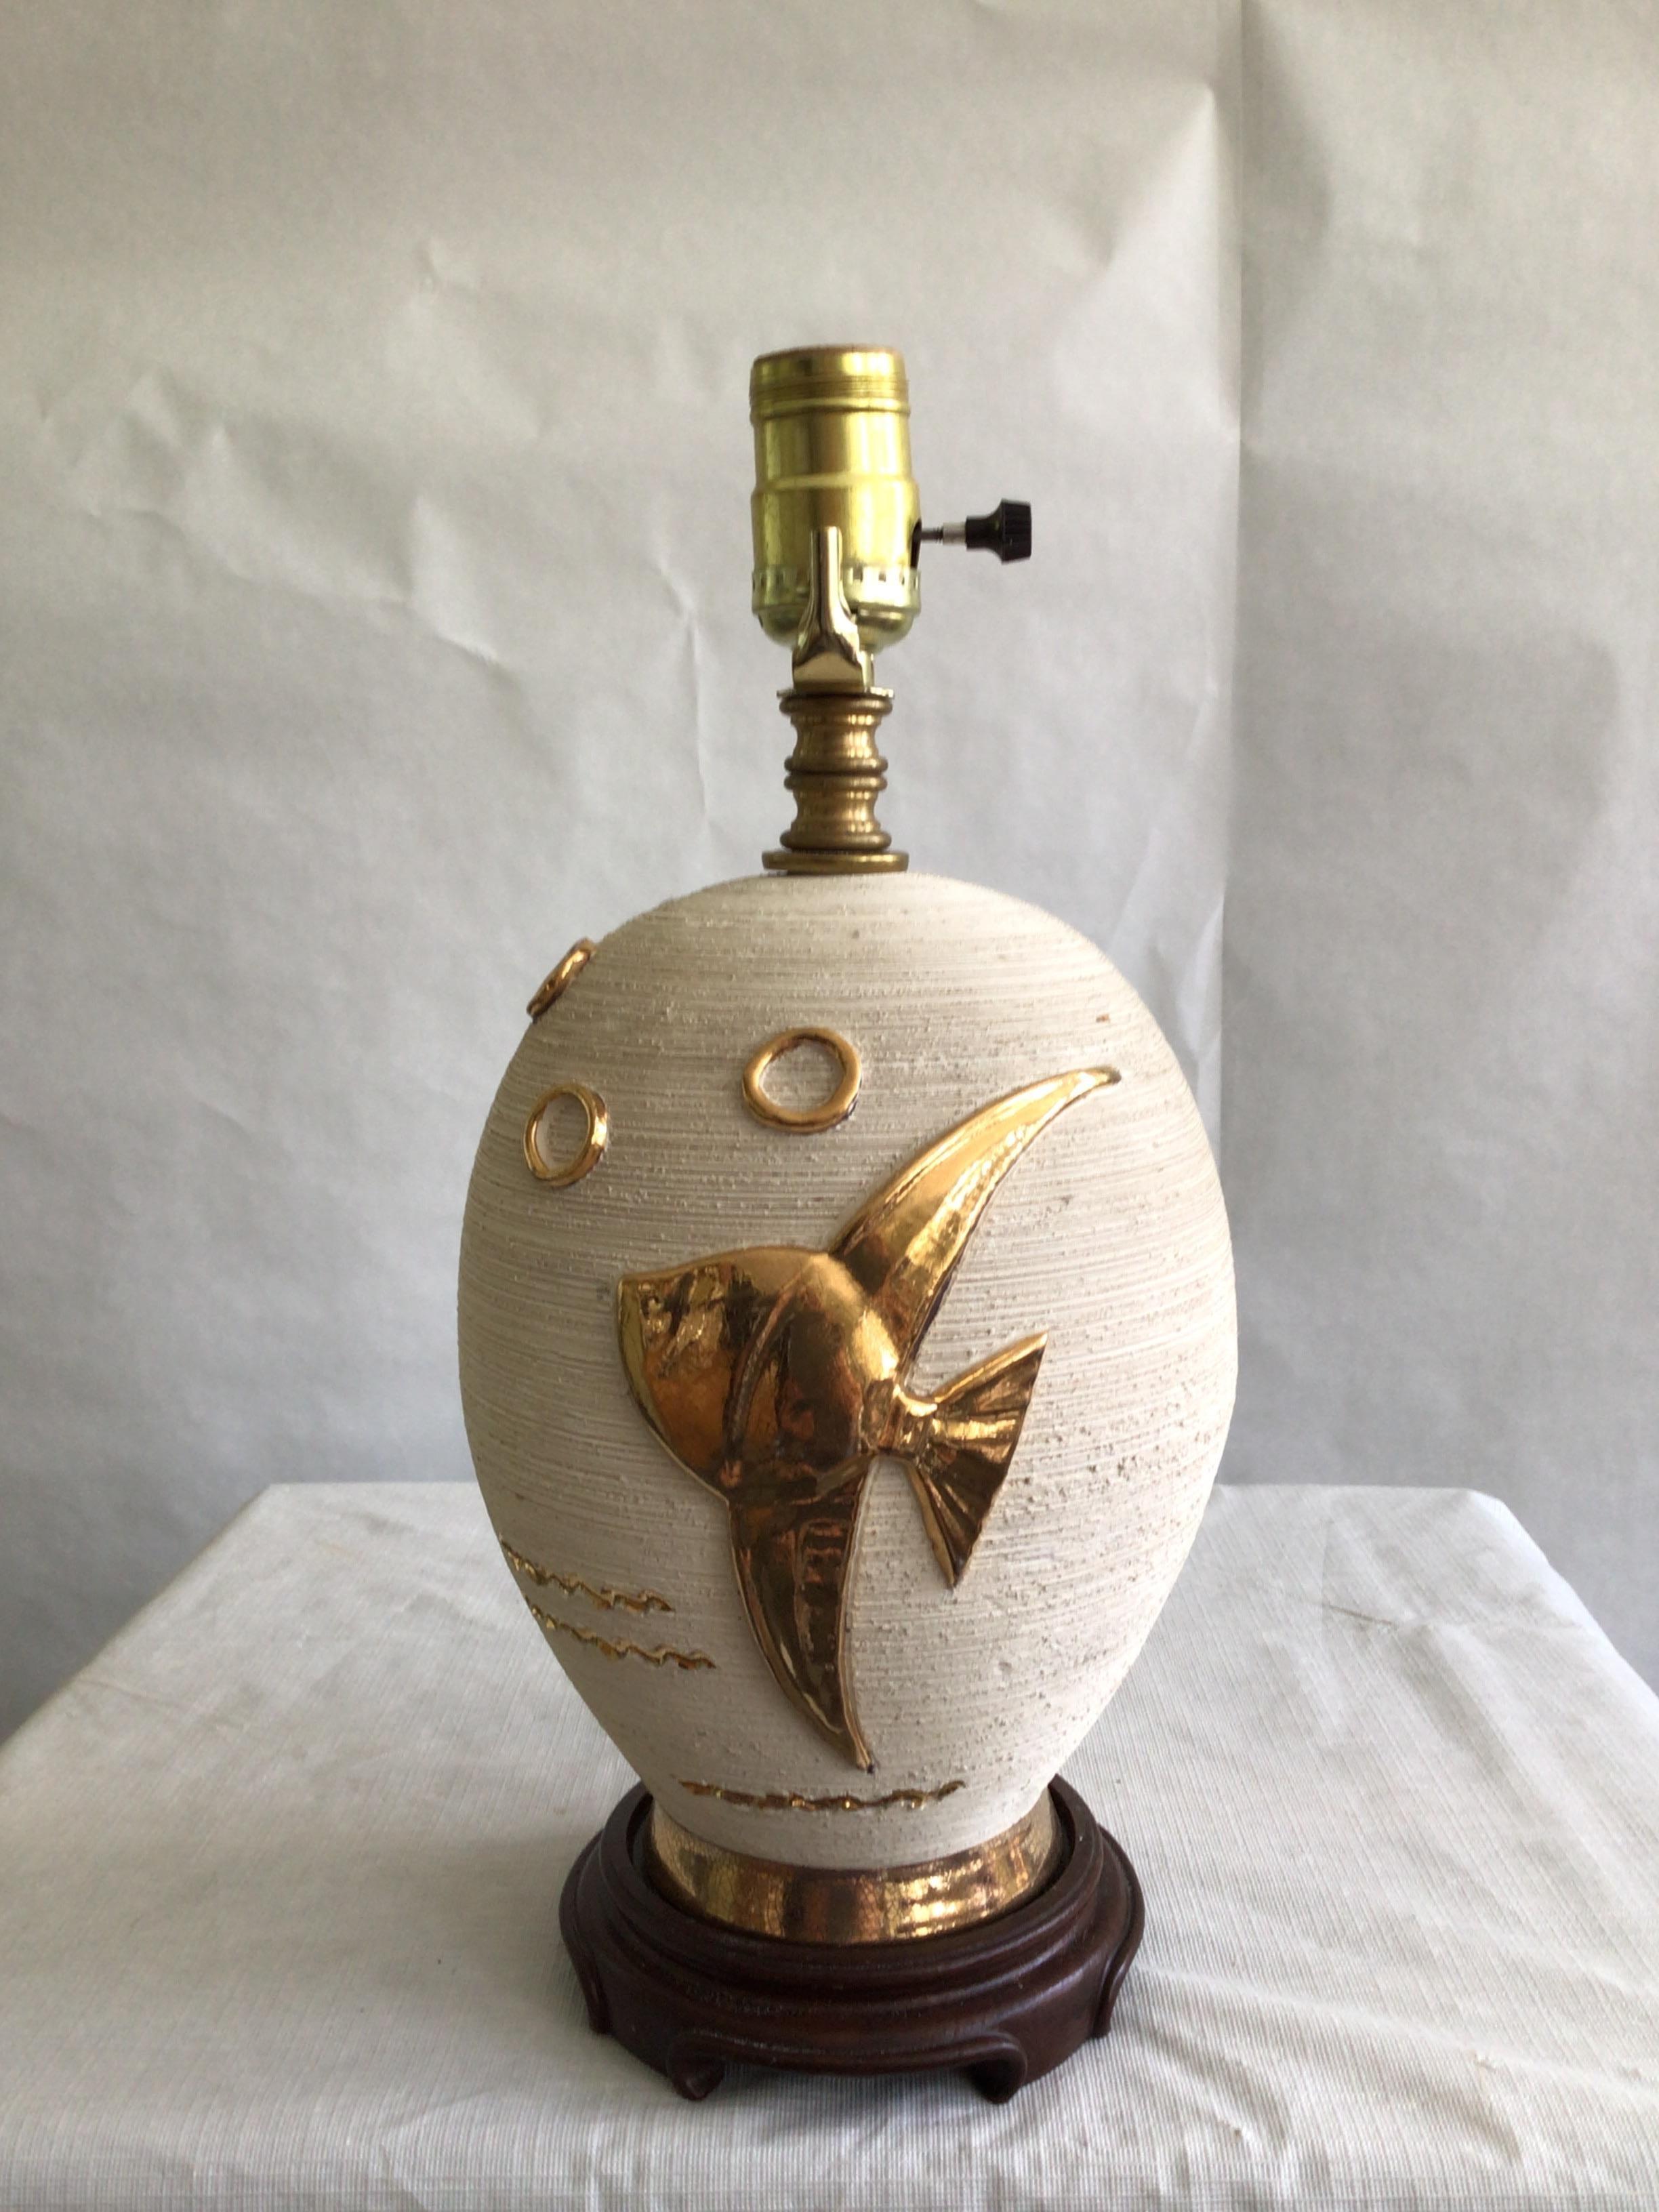 1960s Ceramic Pottery Lamp With Fish Appliqué On Wooden Base
Rough Cream Texture with shiny and smooth Gold Appliqué of a fish and bubbles
Height to Top of Socket
Needs Rewiring
